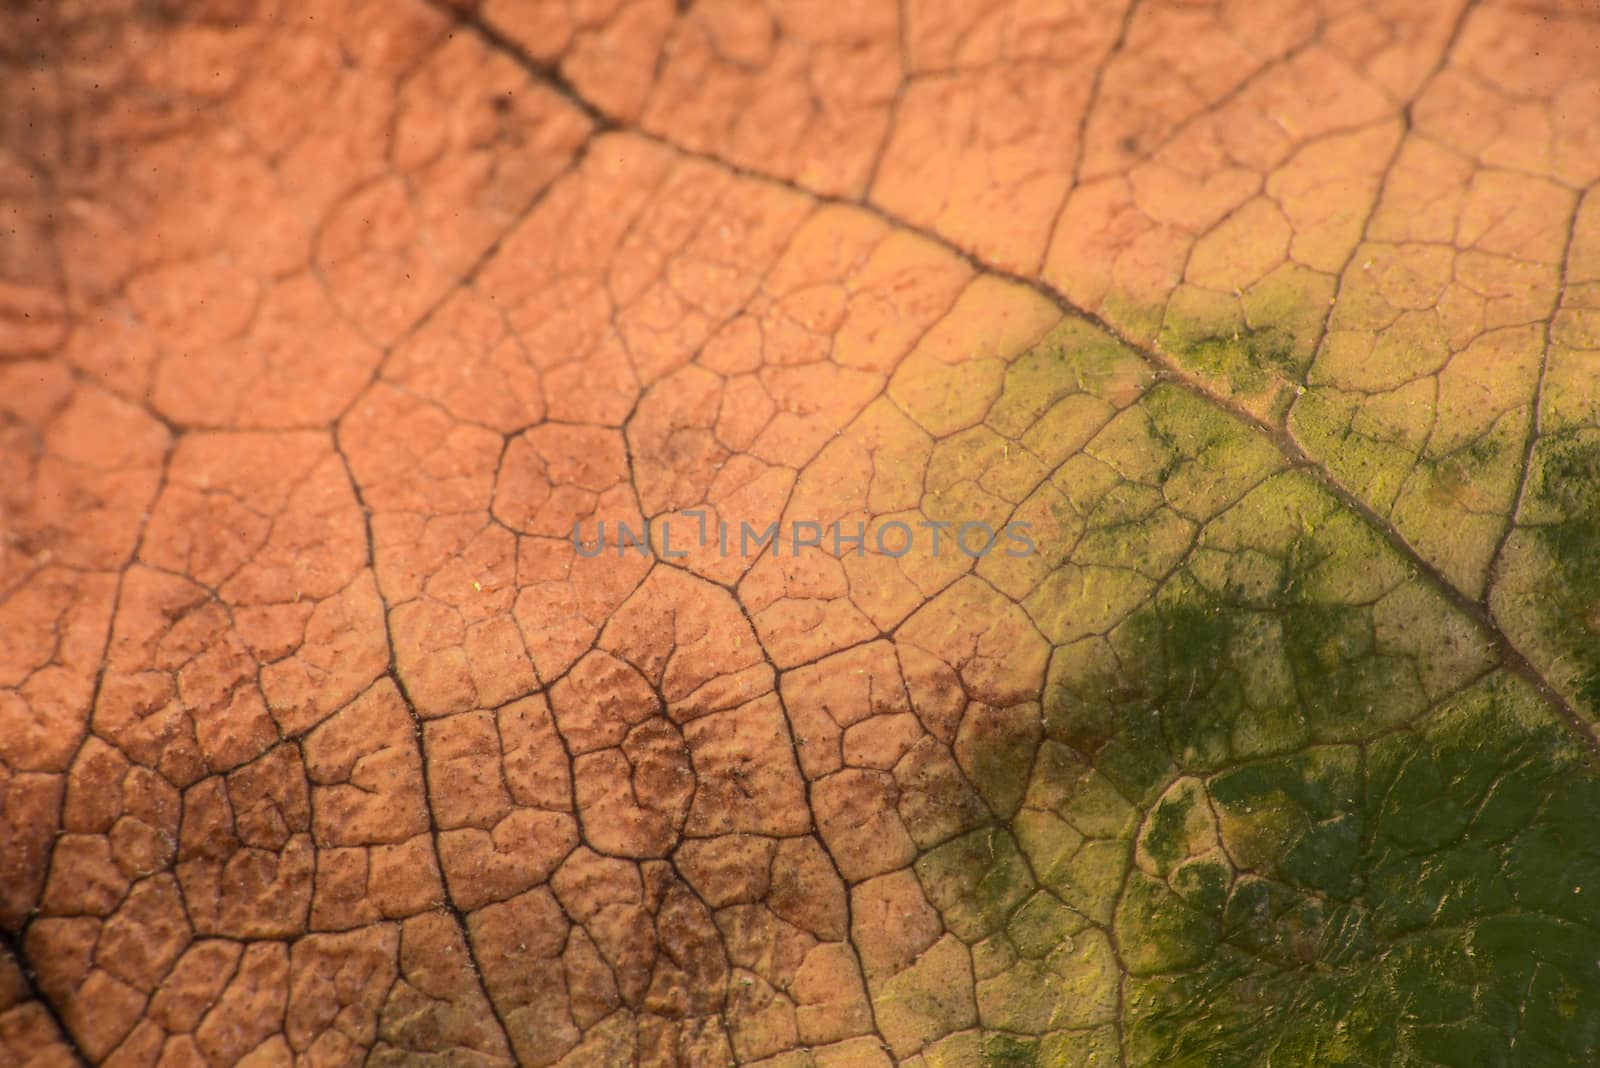 Macro photograph of the texture of a leaf in autumn on the ground